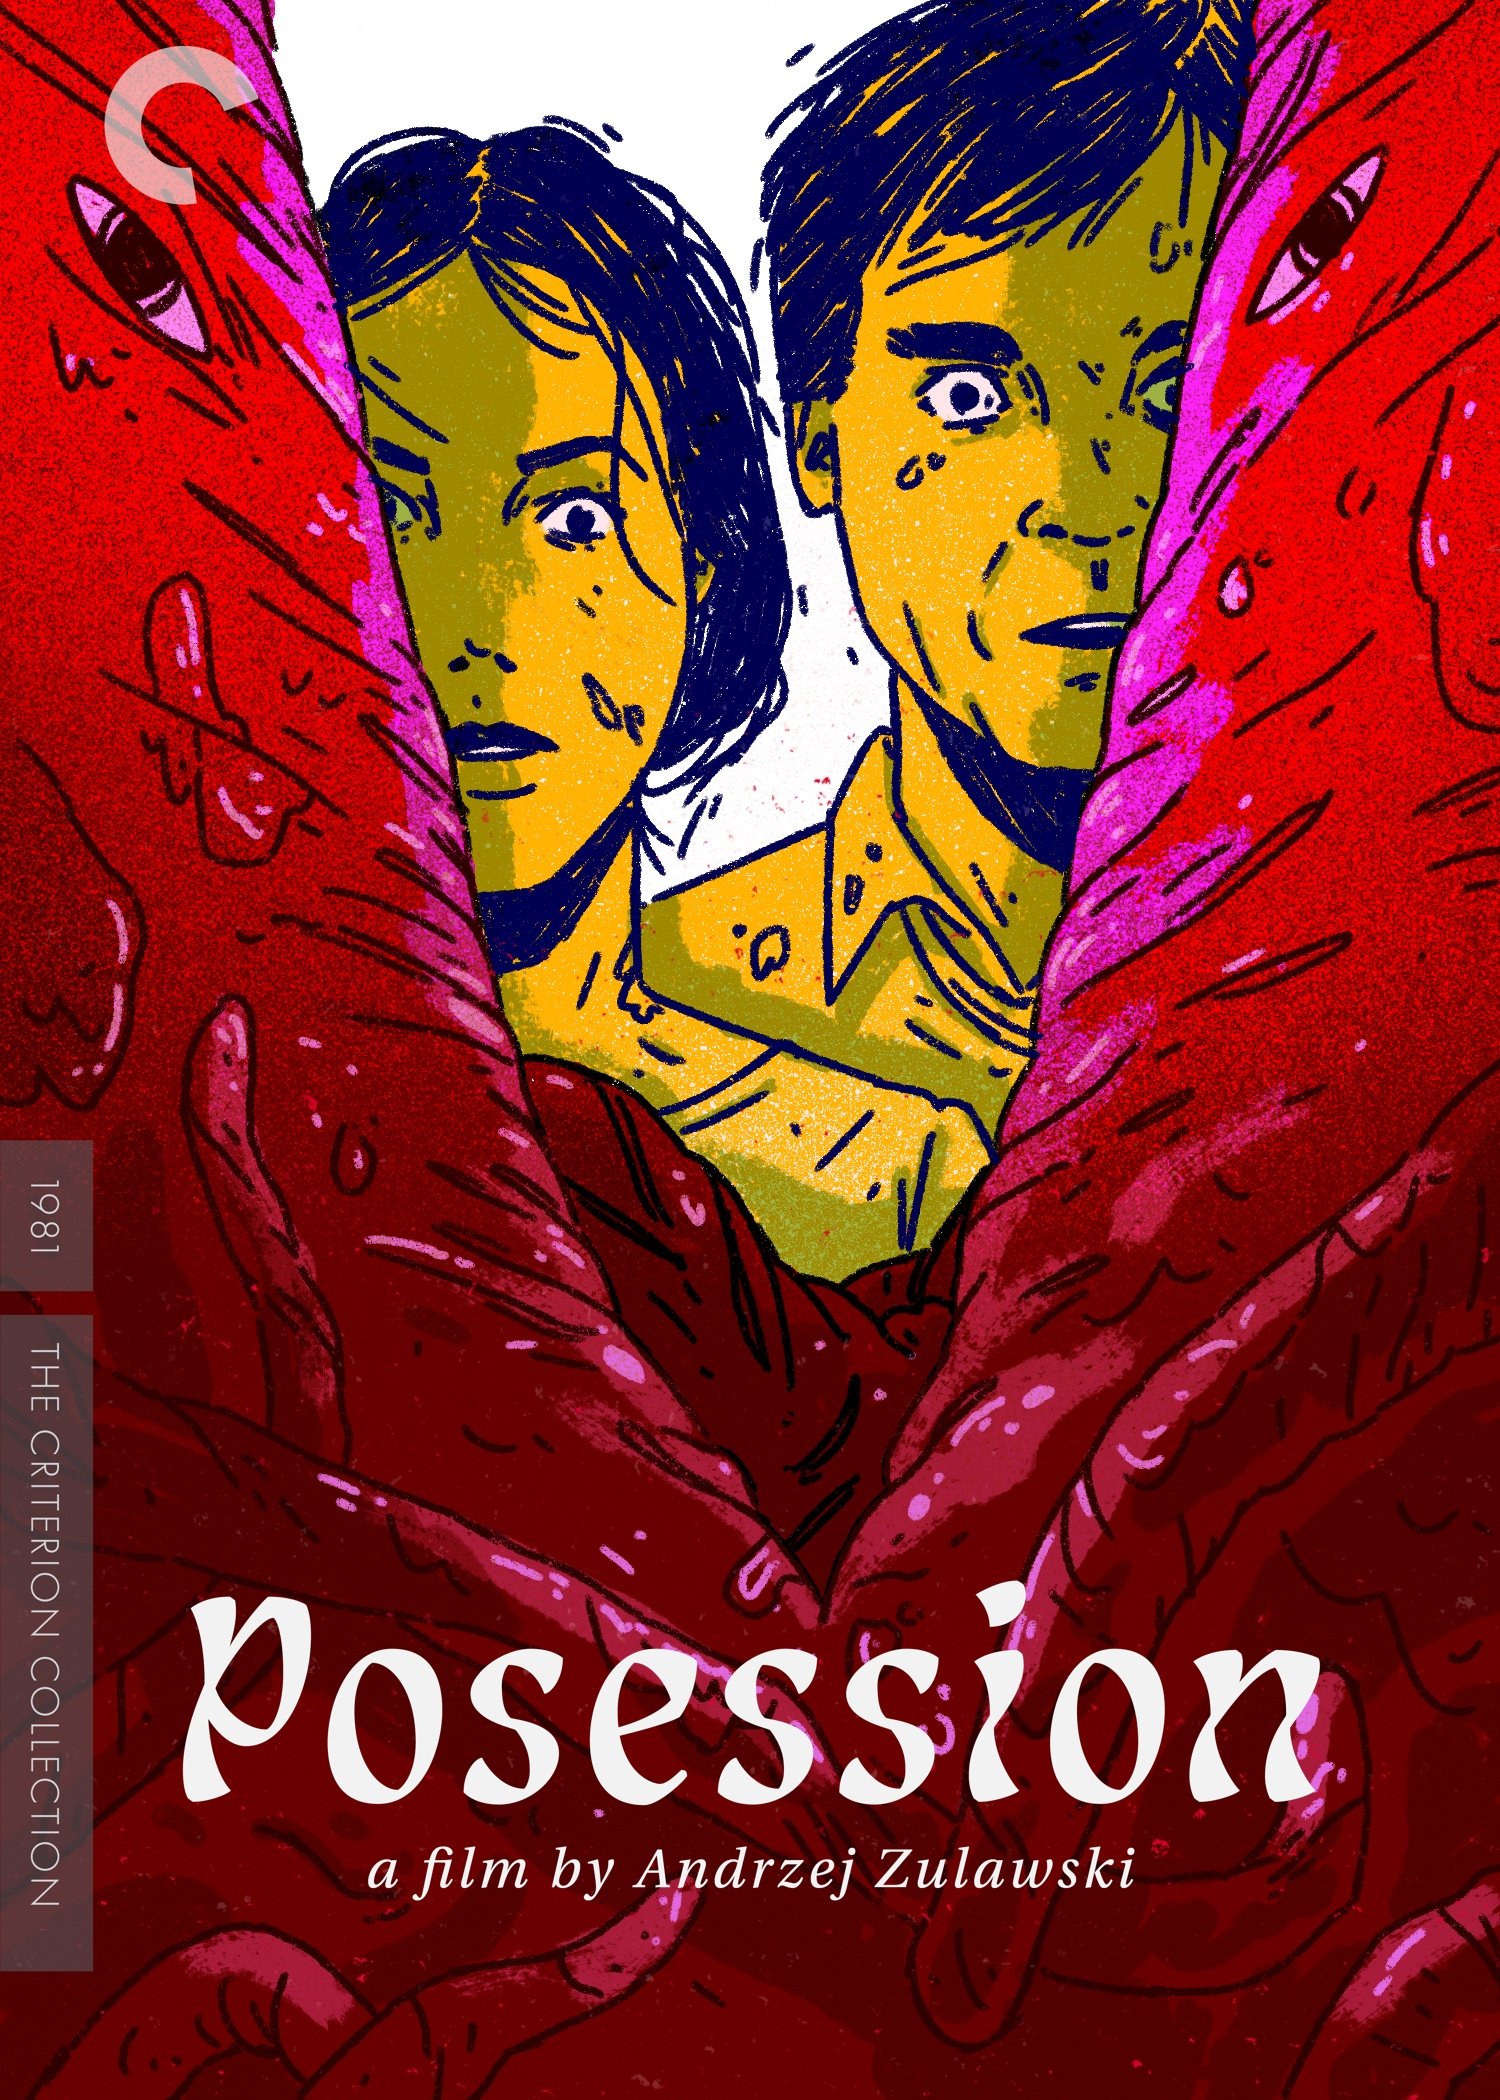 Criterion - Posession